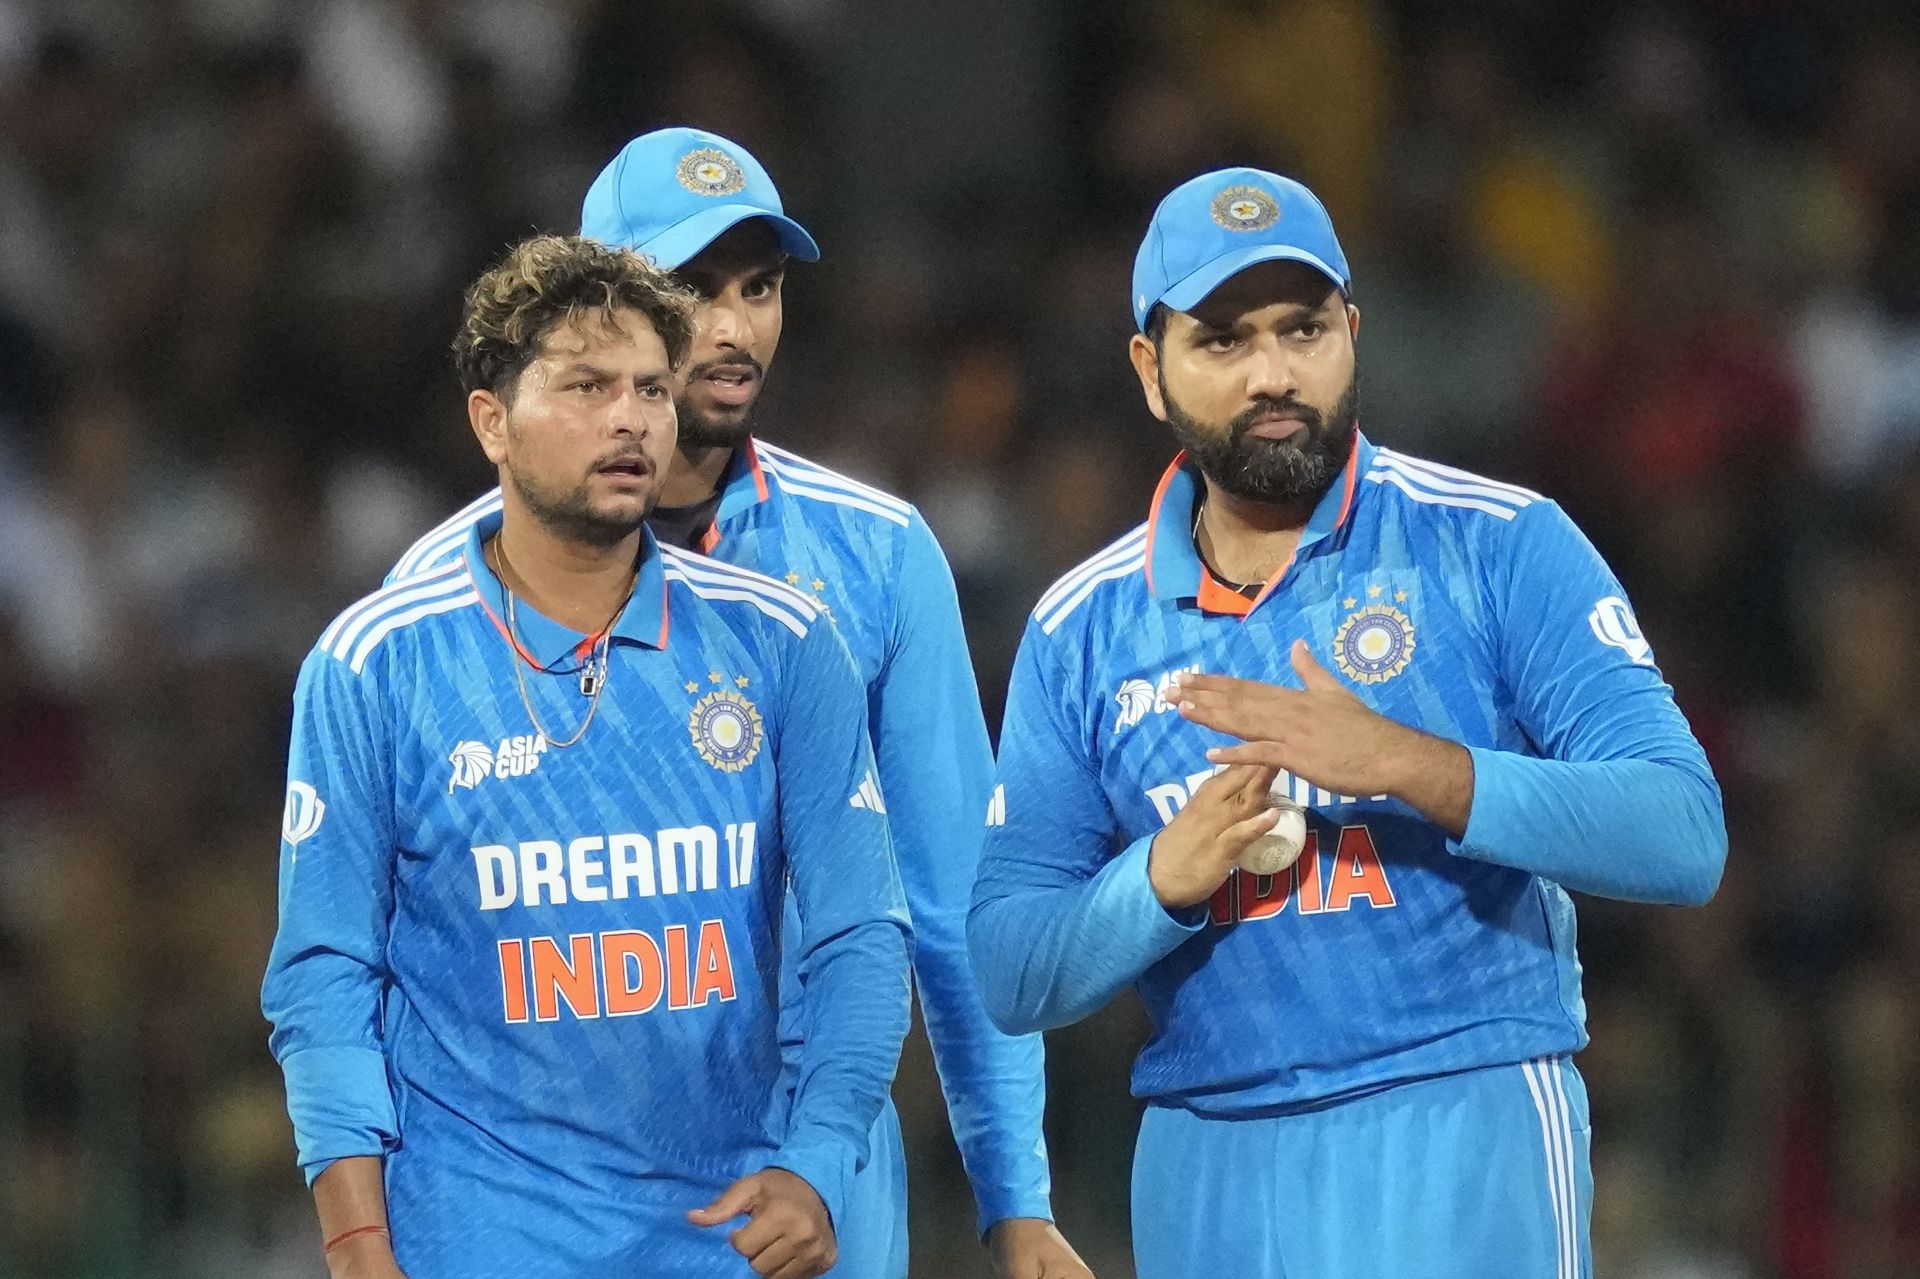 Kuldeep Yadav is a wicket-taking weapon in the middle overs. [P/C: AP]